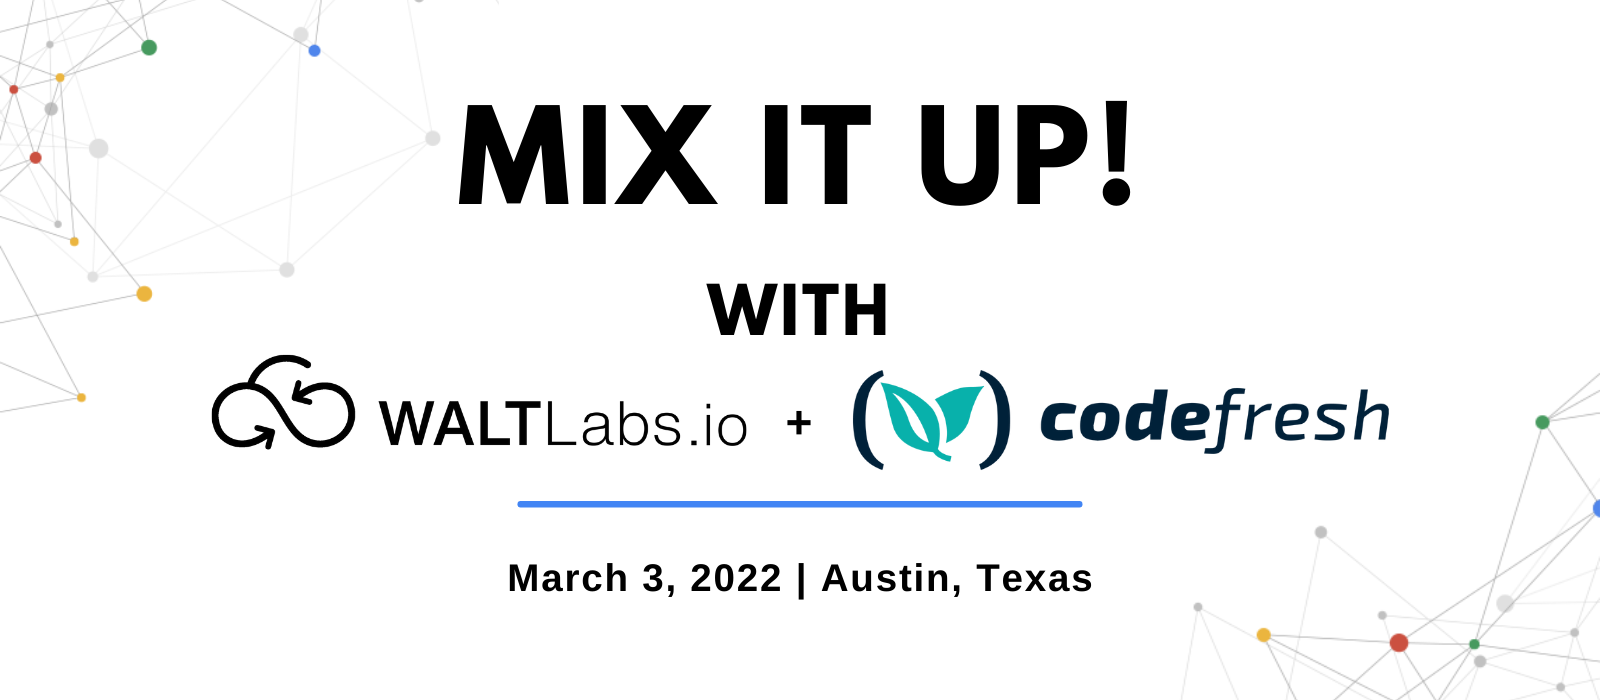 Mix it Up with WALTLabs.io + Codefresh